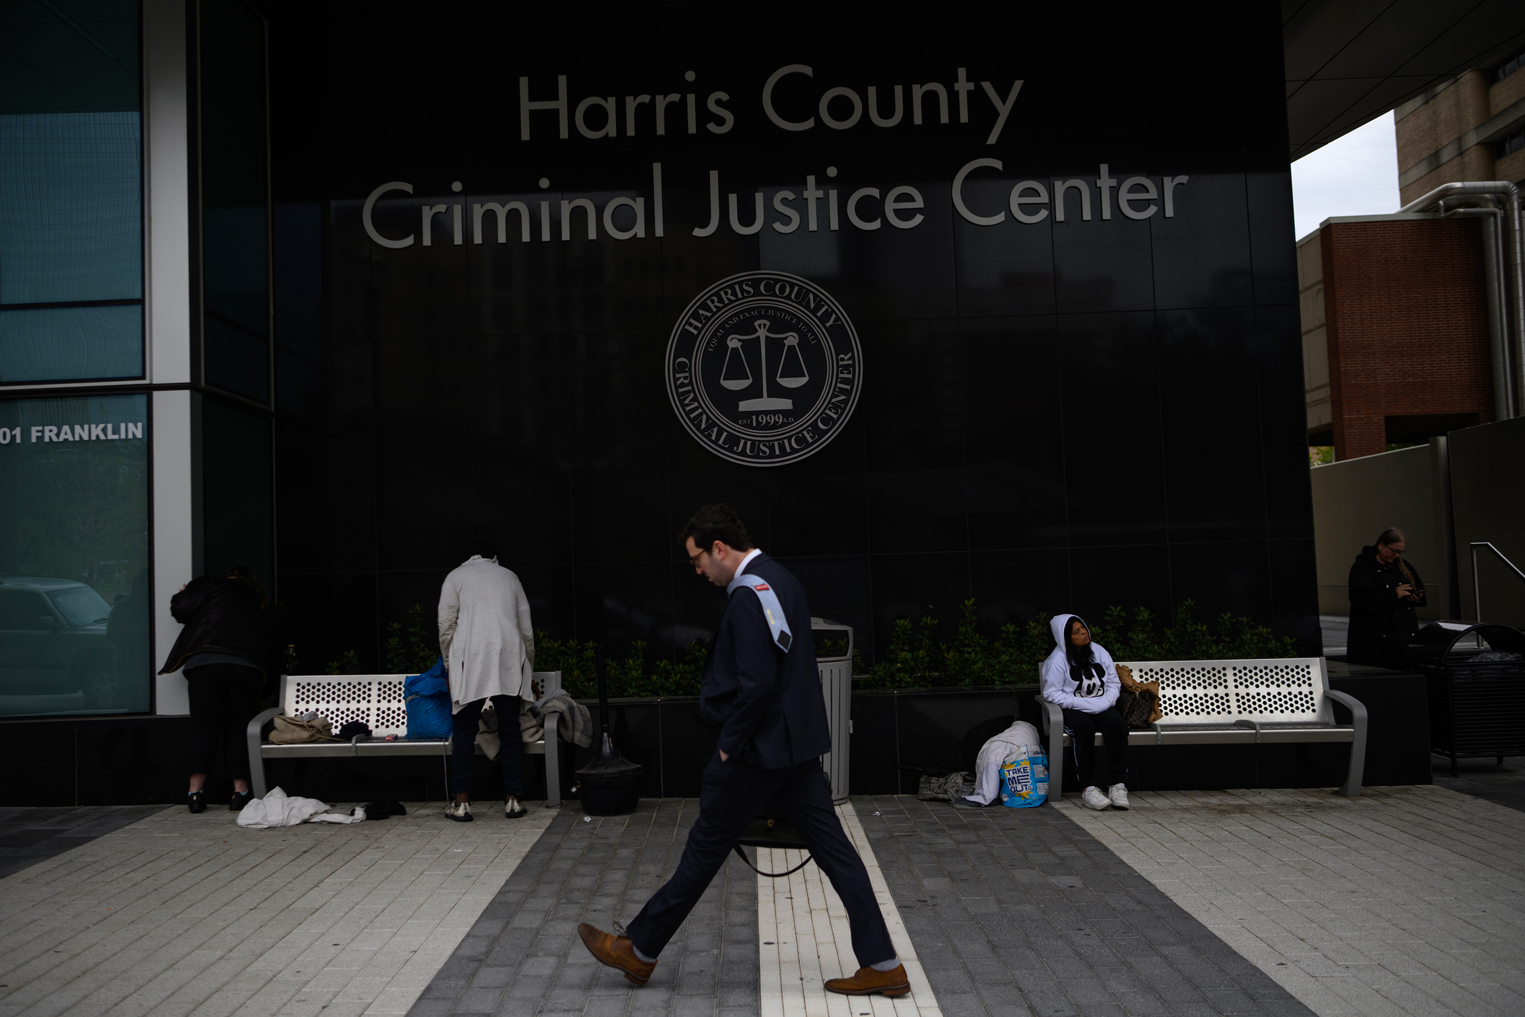 A person walks past the Harris County Criminal Justice Center